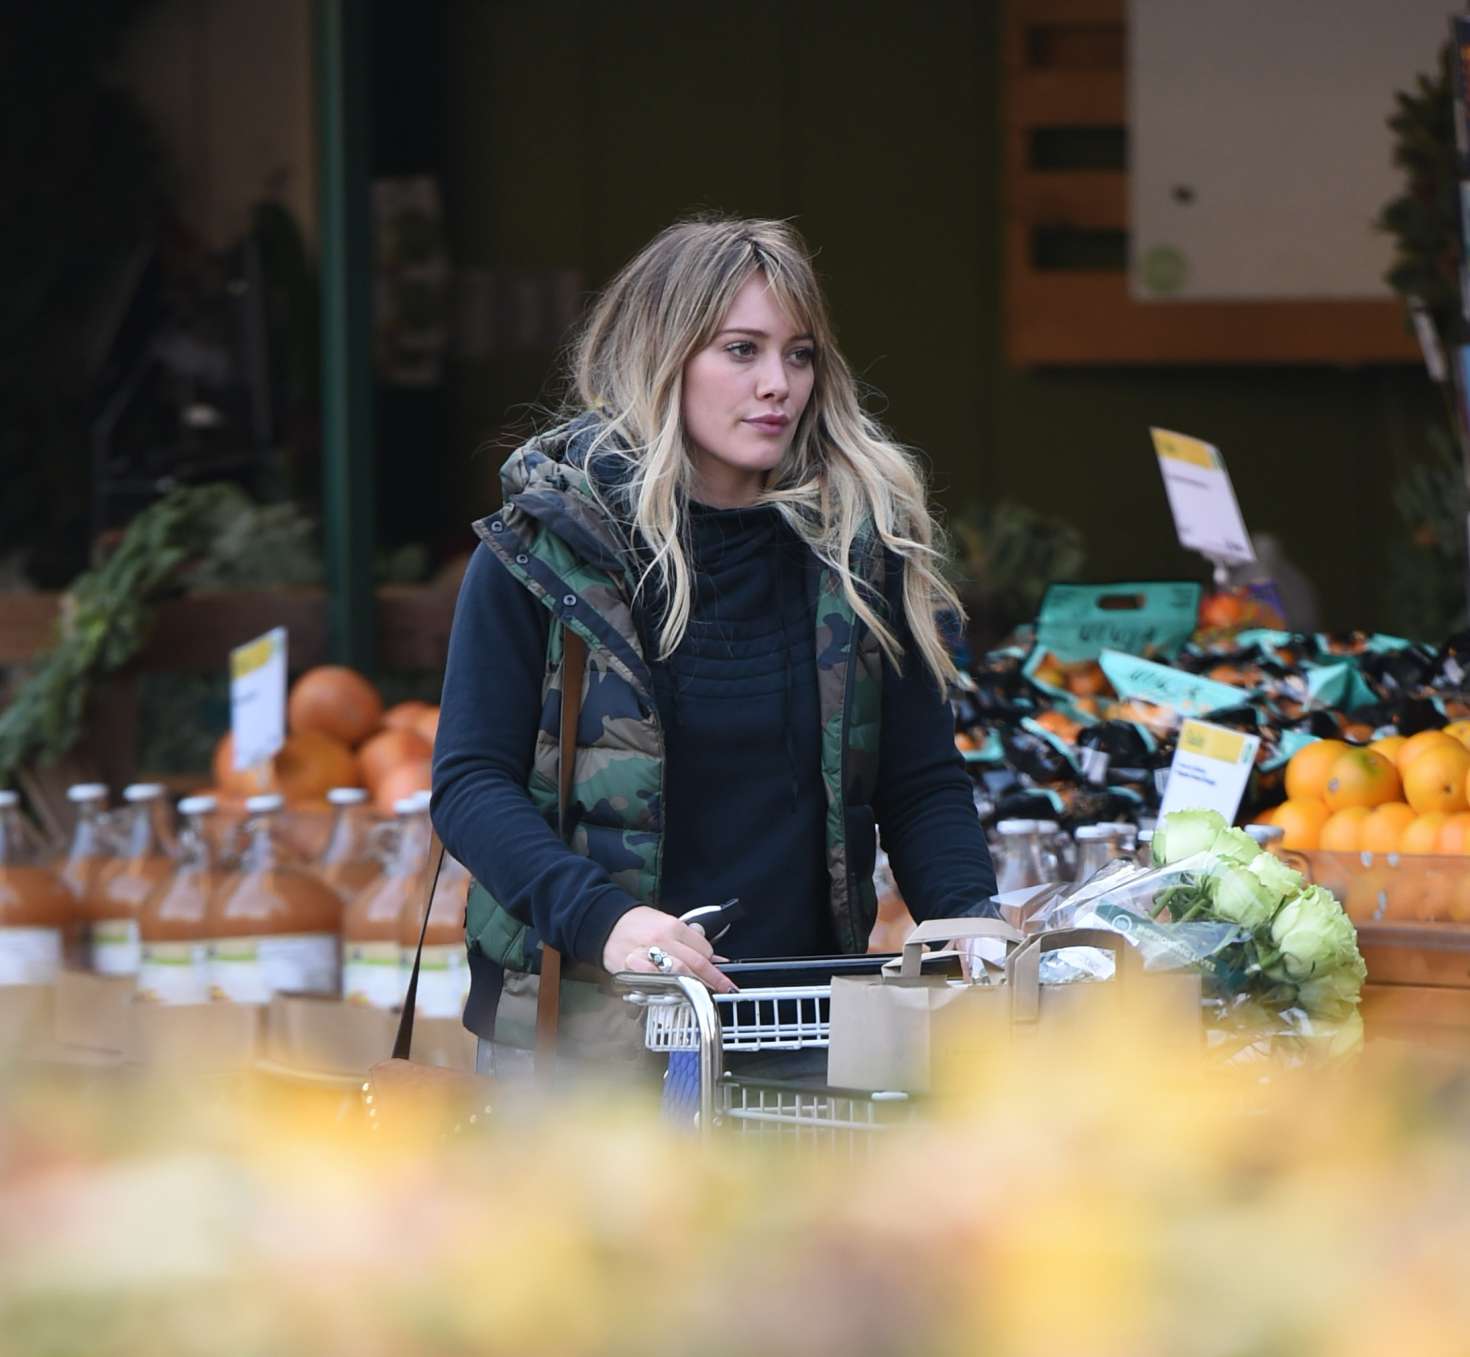 Hilary Duff â€“ Shopping at Whole Foods in Los Angeles